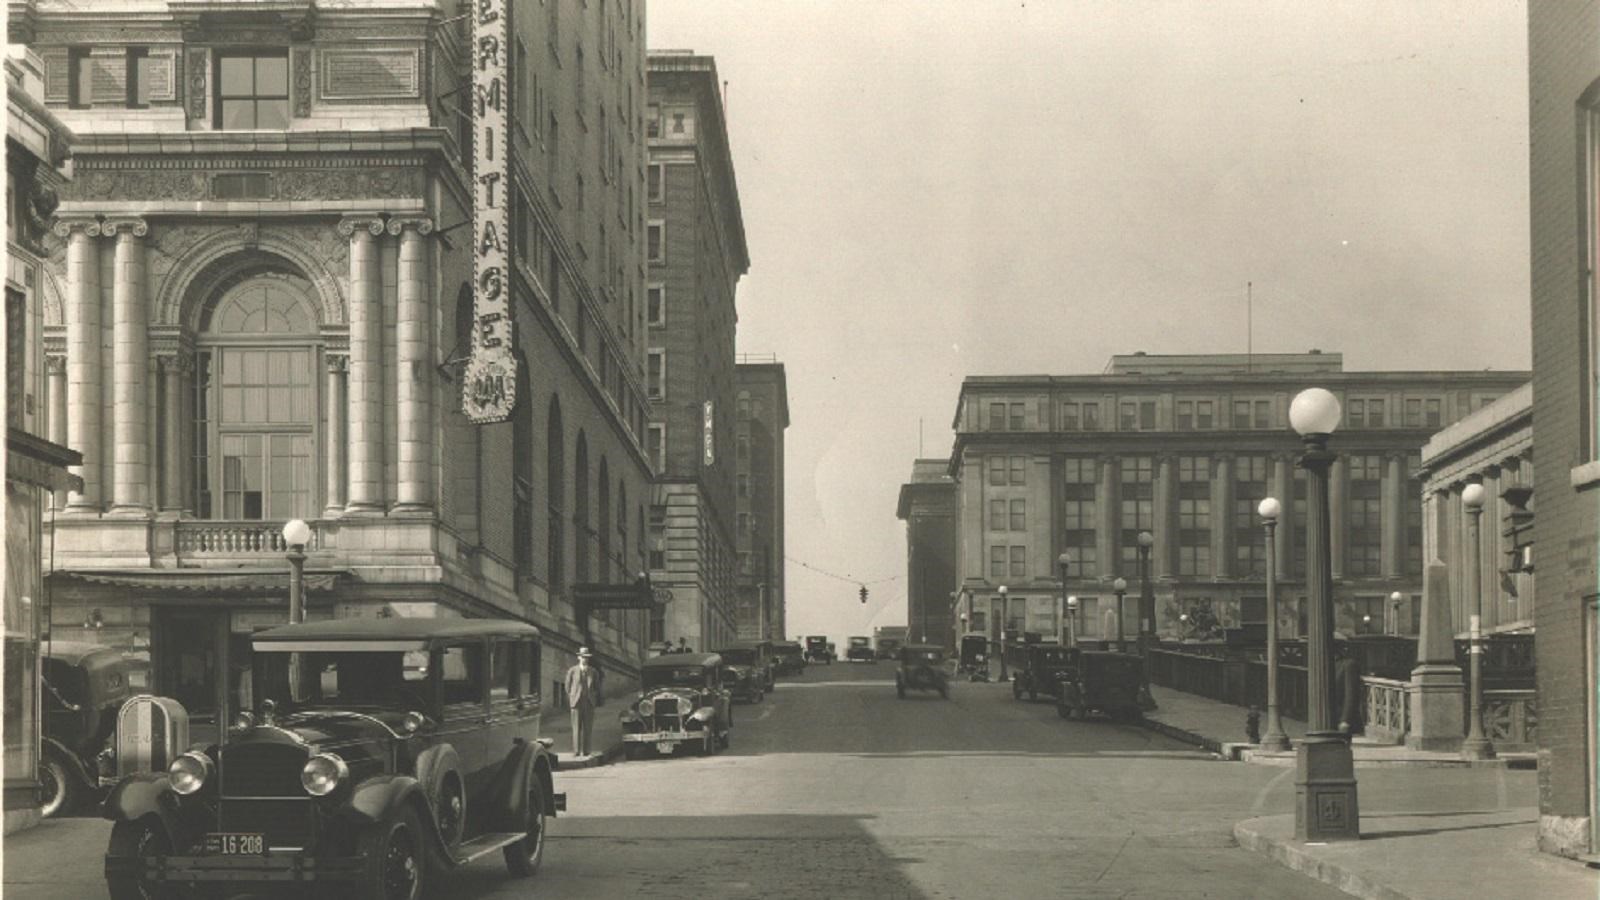 Black and white photo of city street, buildings including the Hermitage Hotel, and automobiles.